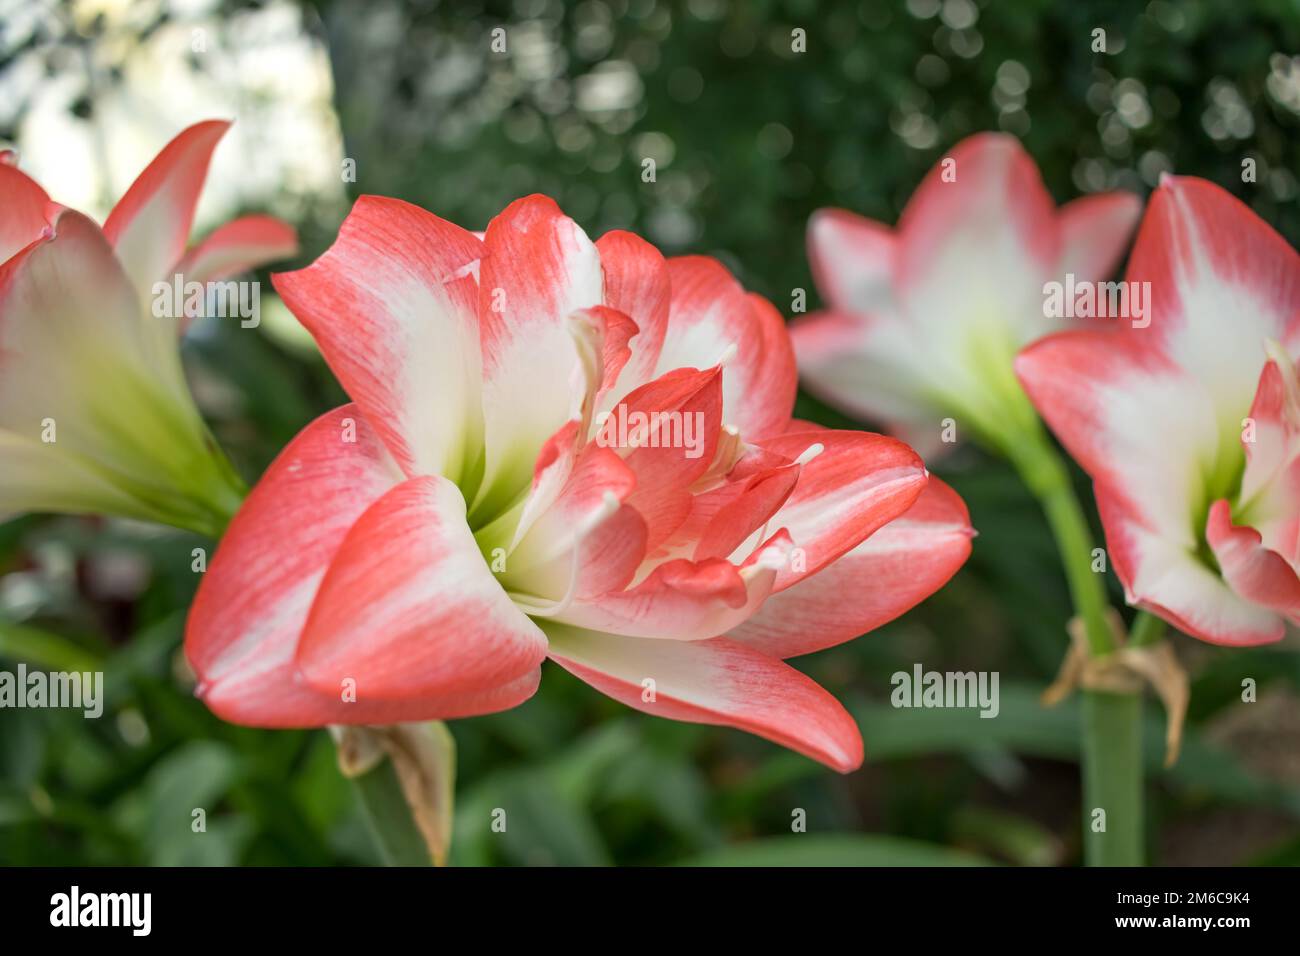 Pink and White Amaryllis; Hippeastrum Hybridum, a Genus of South American Bulbs Stock Photo